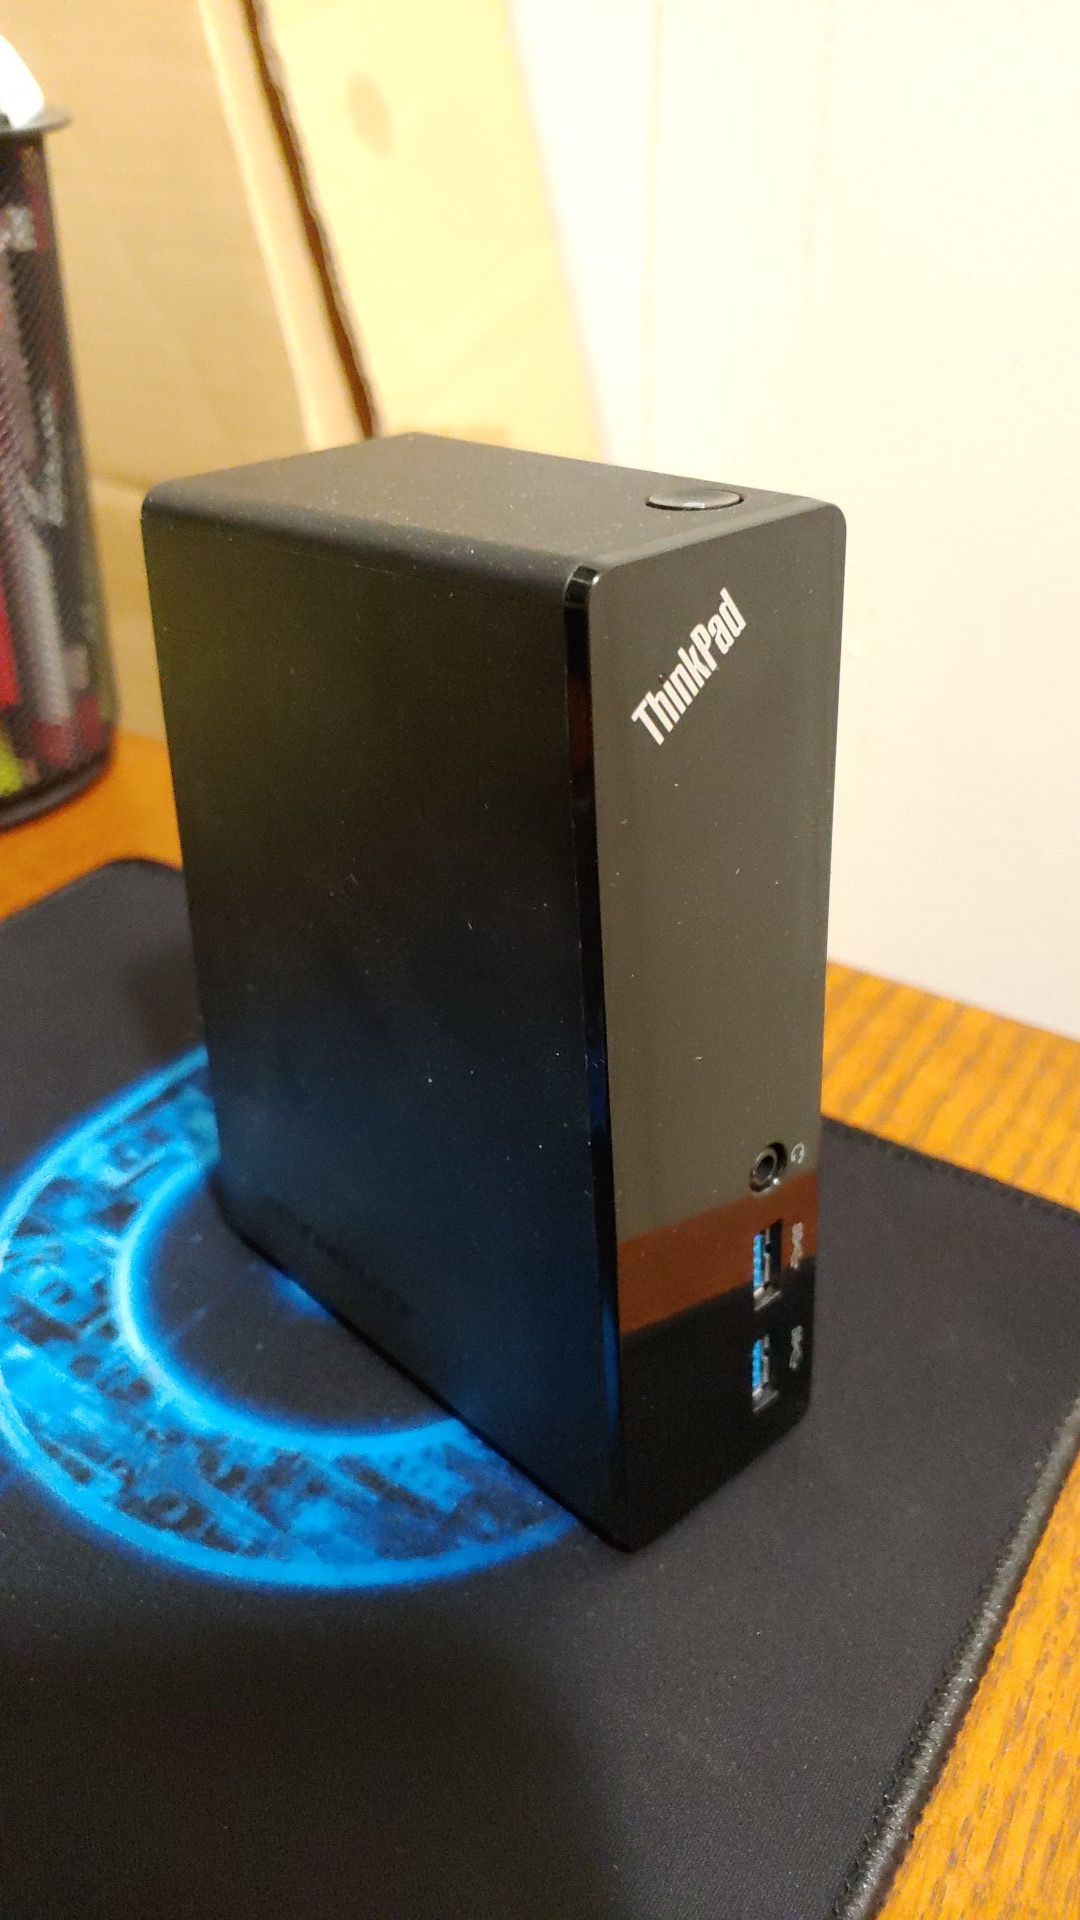 Glamour Tale eskalere Lenovo Thinkpad USB 3.0 Dock for Sale in Chicago, IL - OfferUp